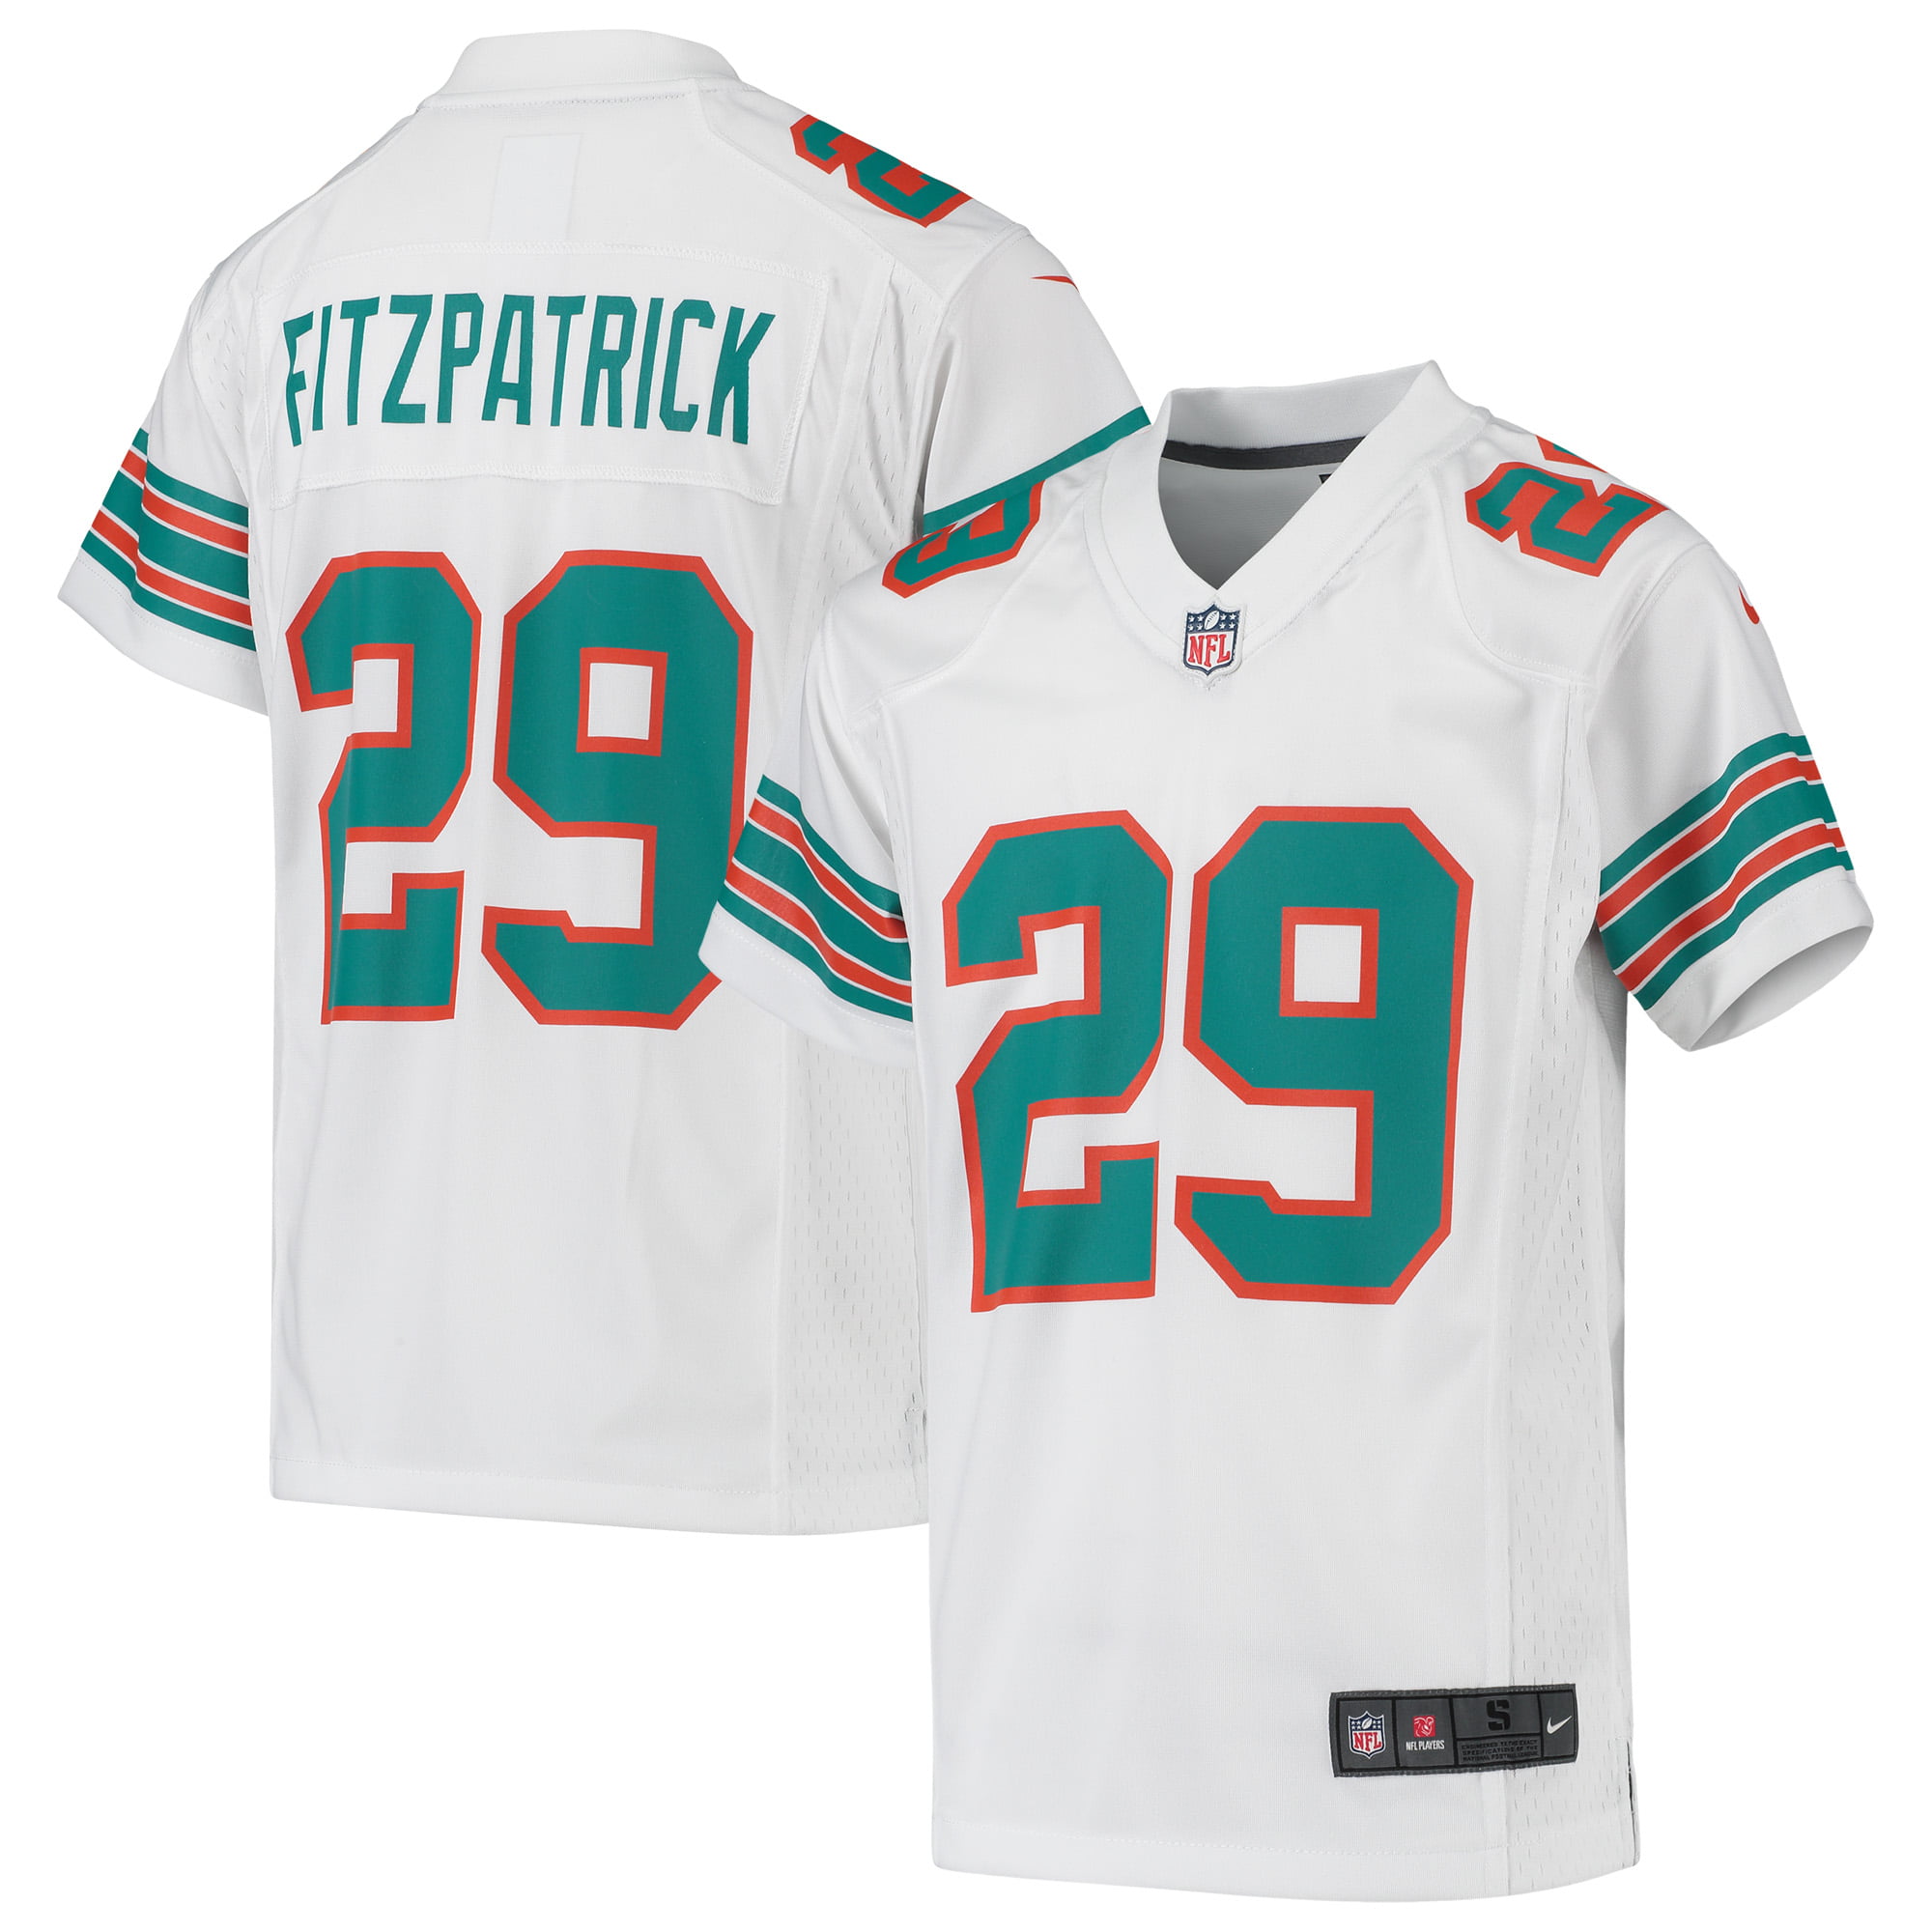 fitzpatrick youth jersey